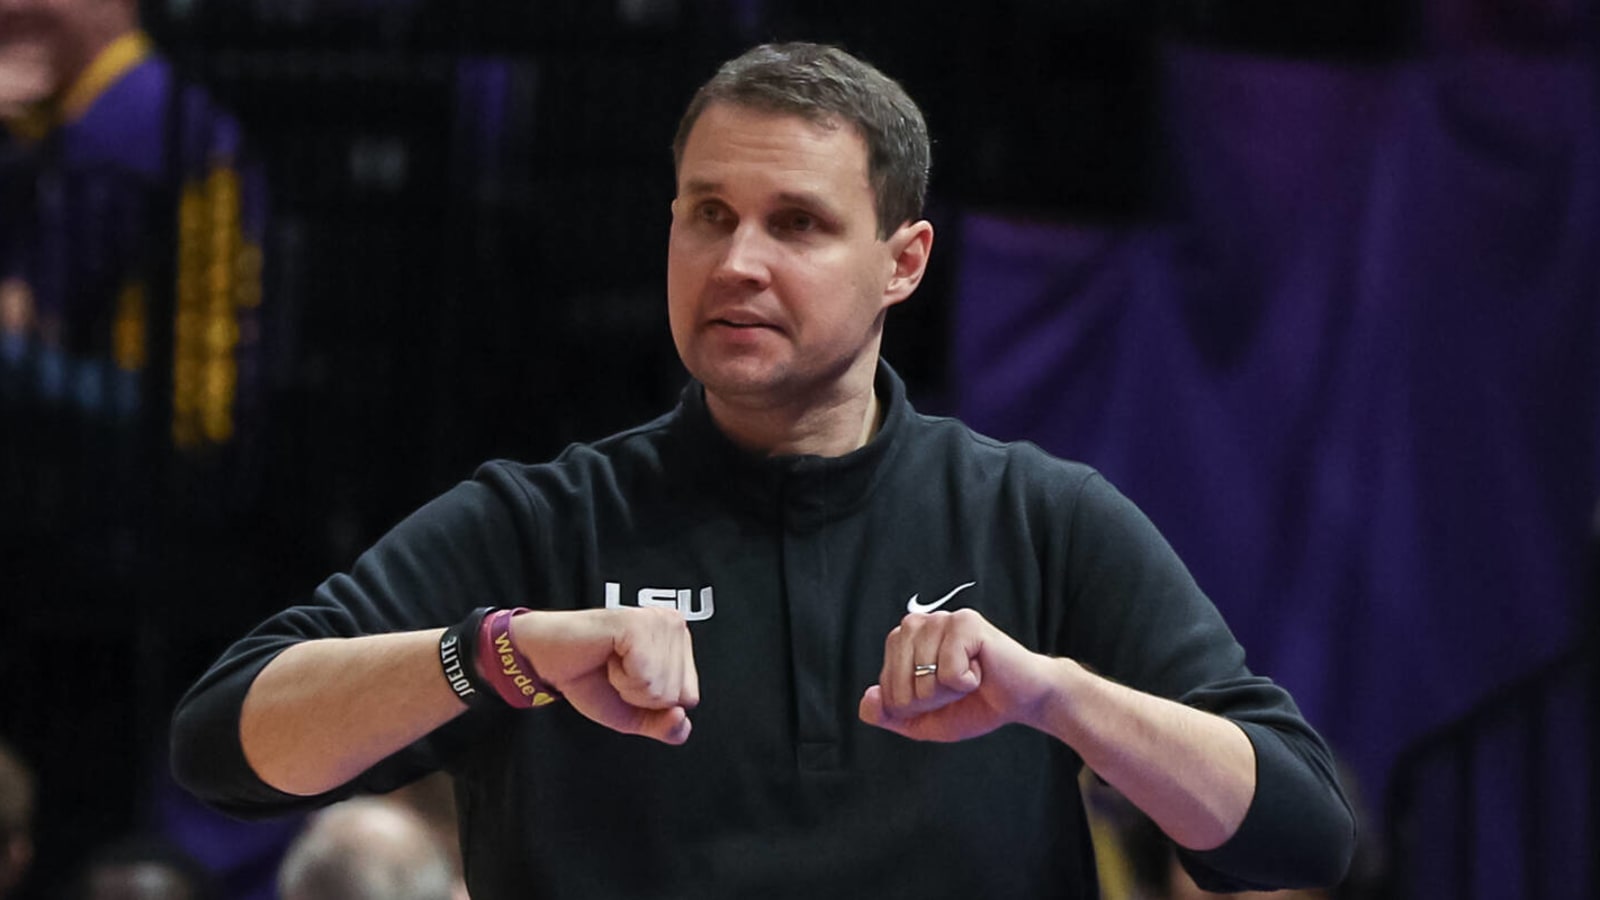 Will Wade allegedly paid hush money to former player's ex-fiancee